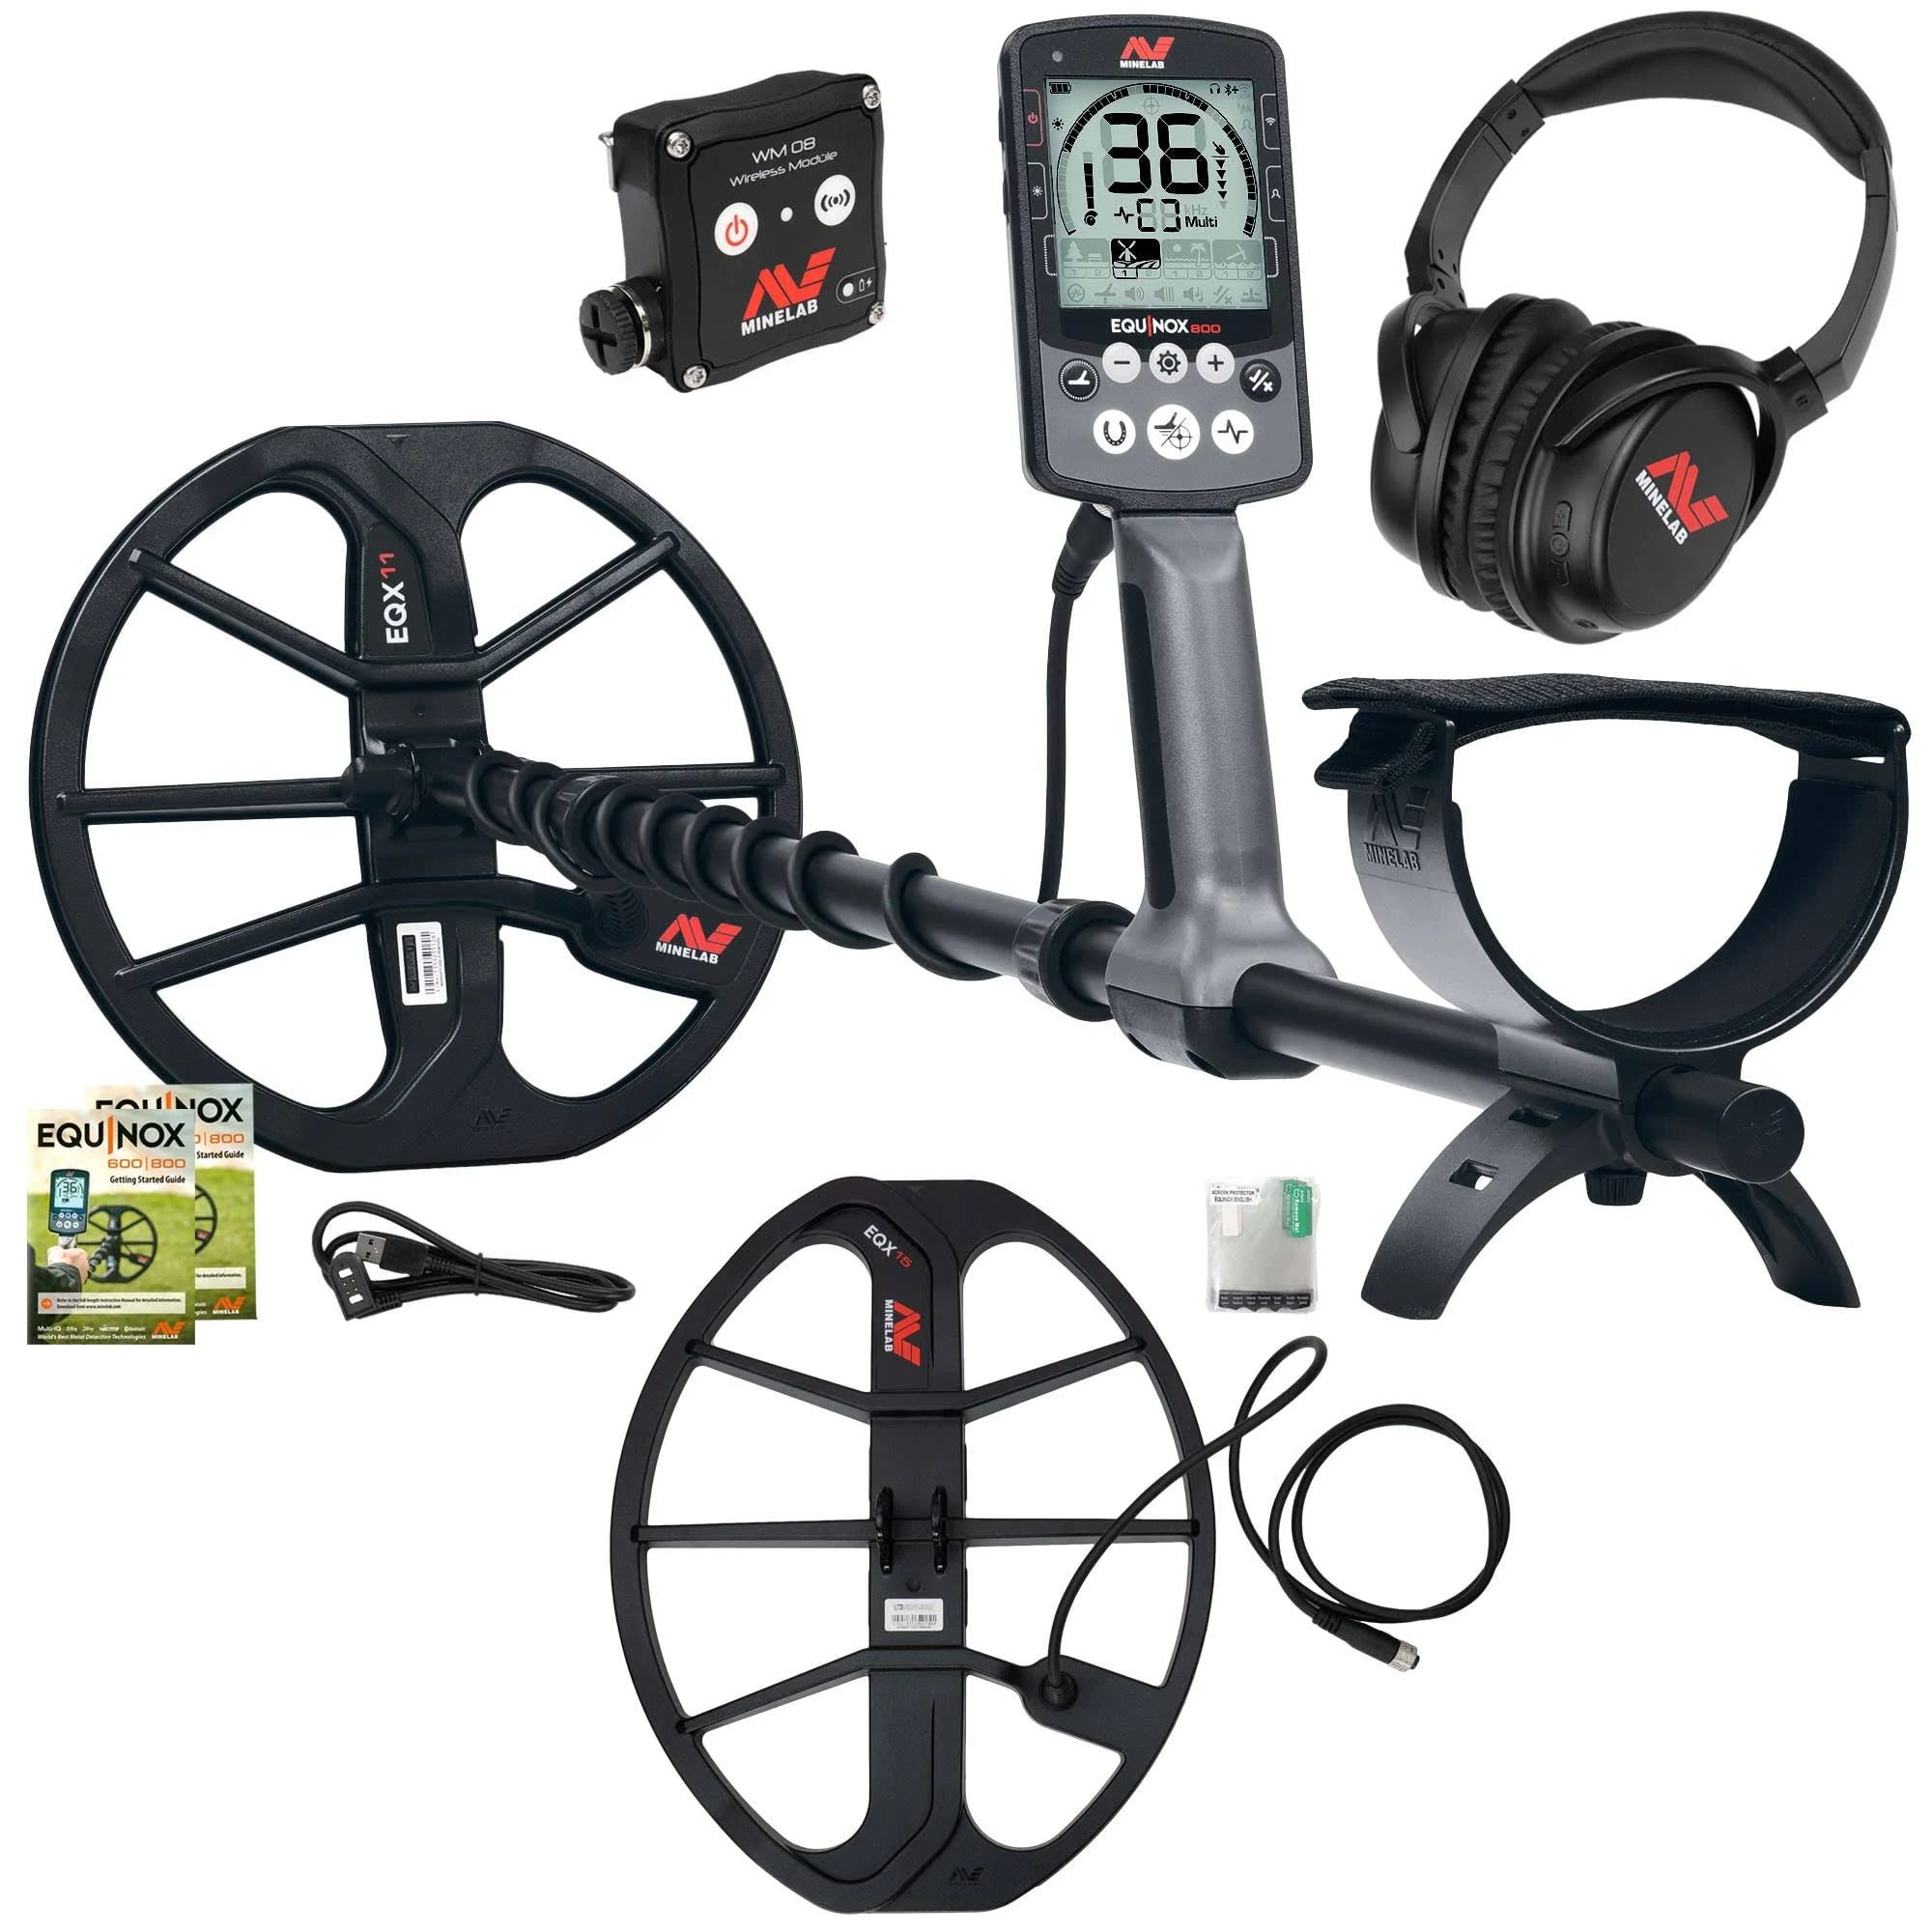 Minelab Equinox 800 Metal Detector with 15inch Double-D Waterproof Smart Search Coil and 4 Detect Settings | Image